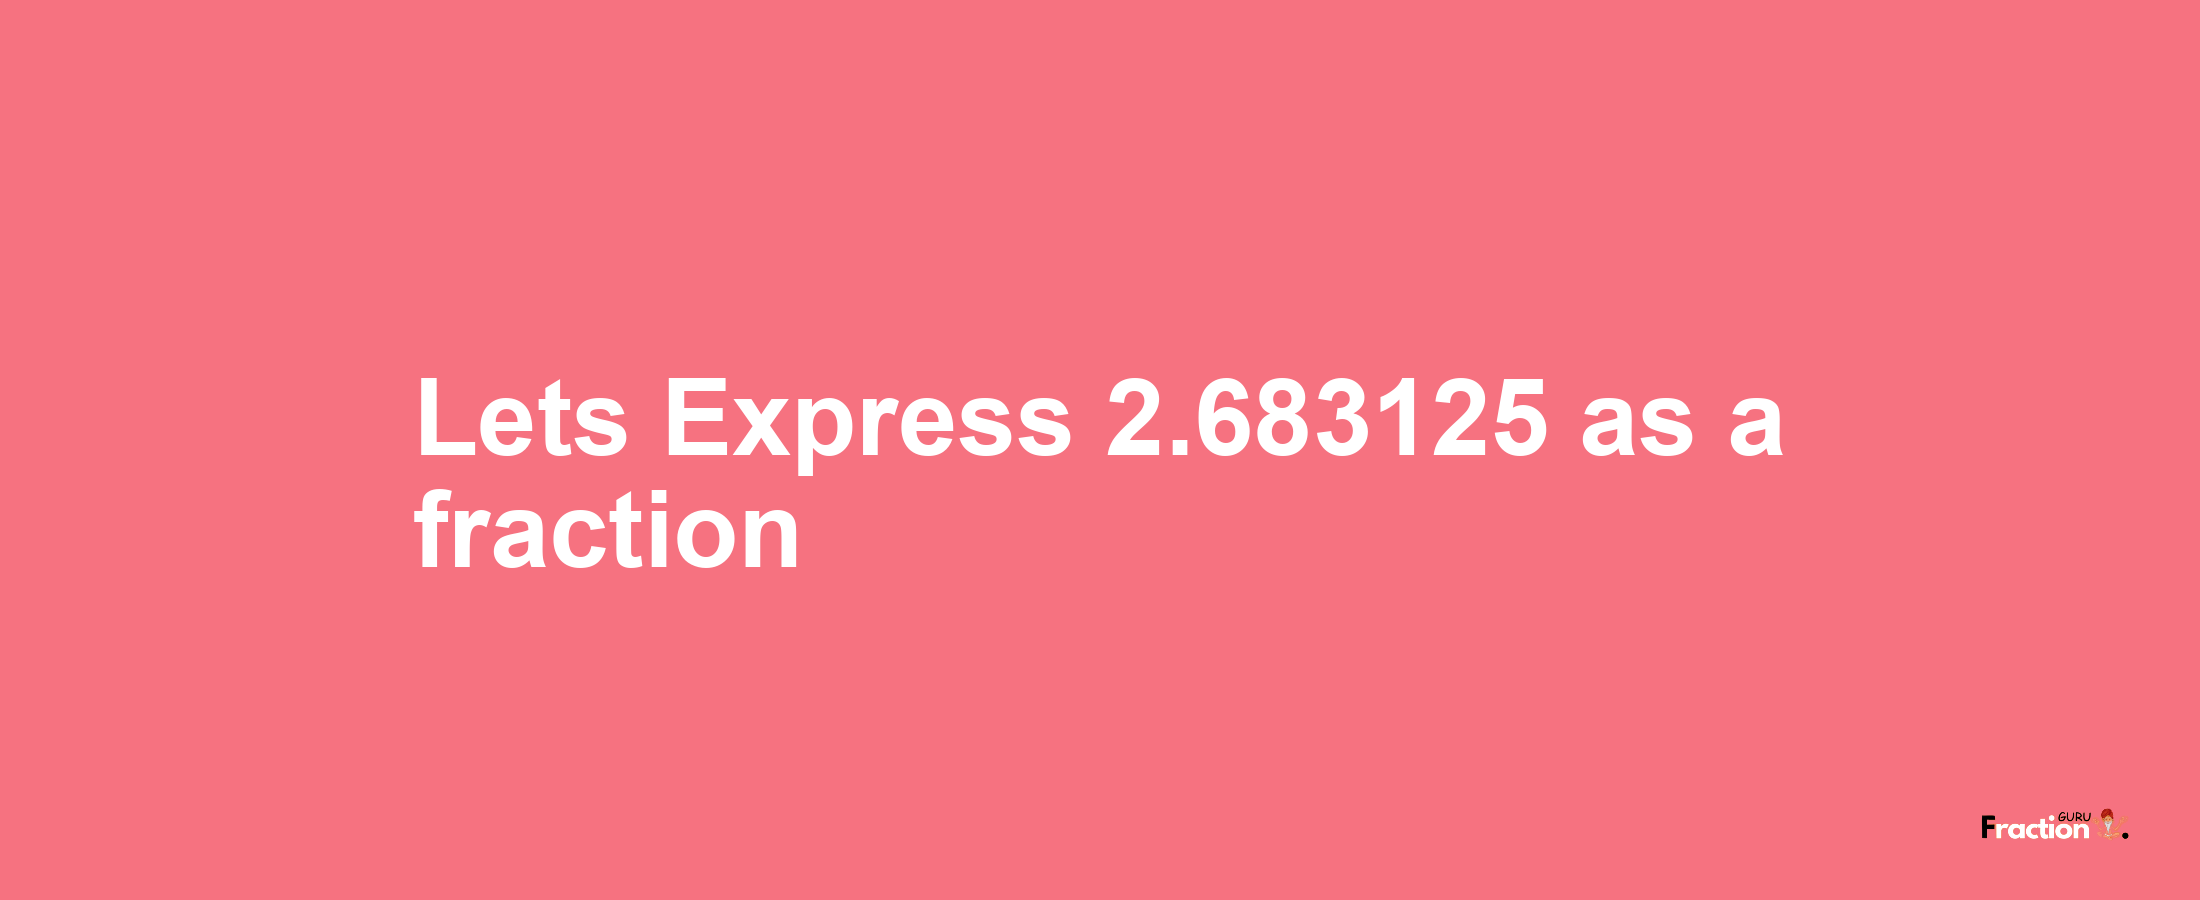 Lets Express 2.683125 as afraction